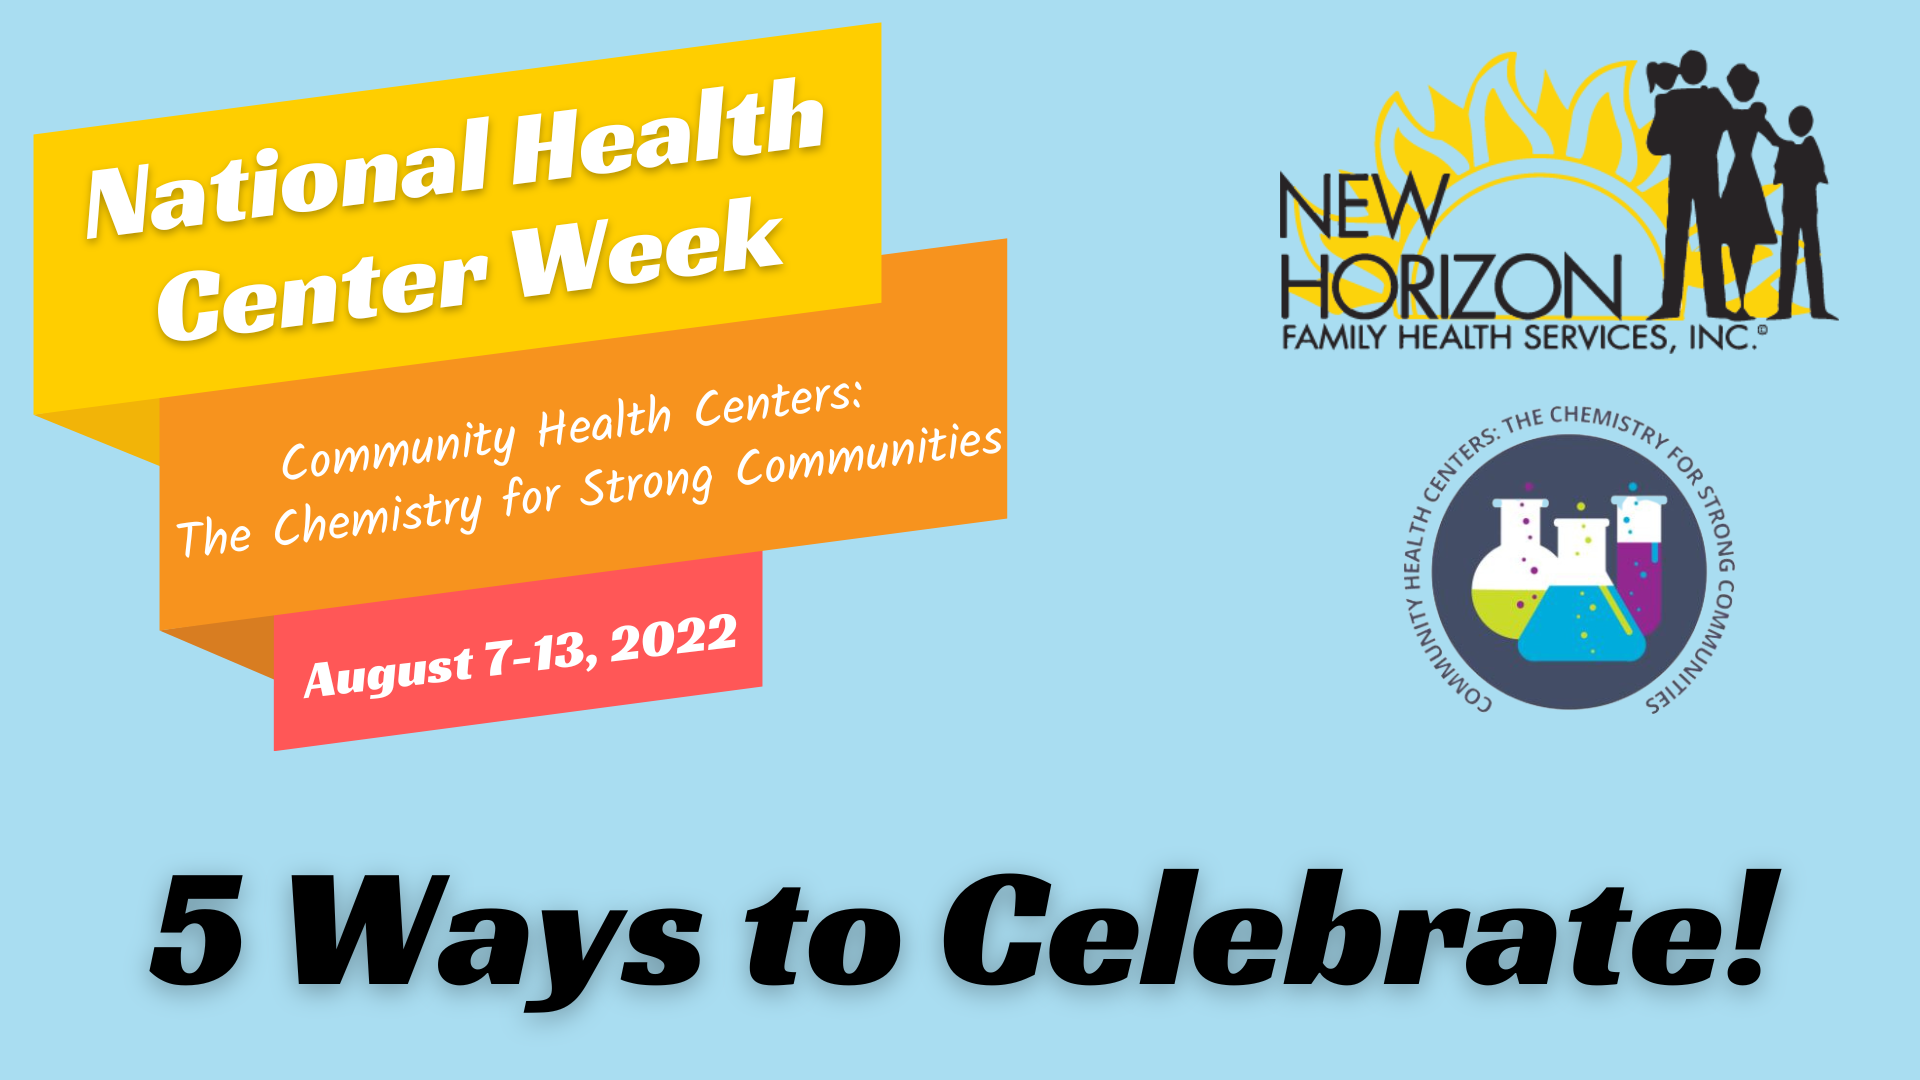 How Will You Celebrate National Health Center Week? New Horizon